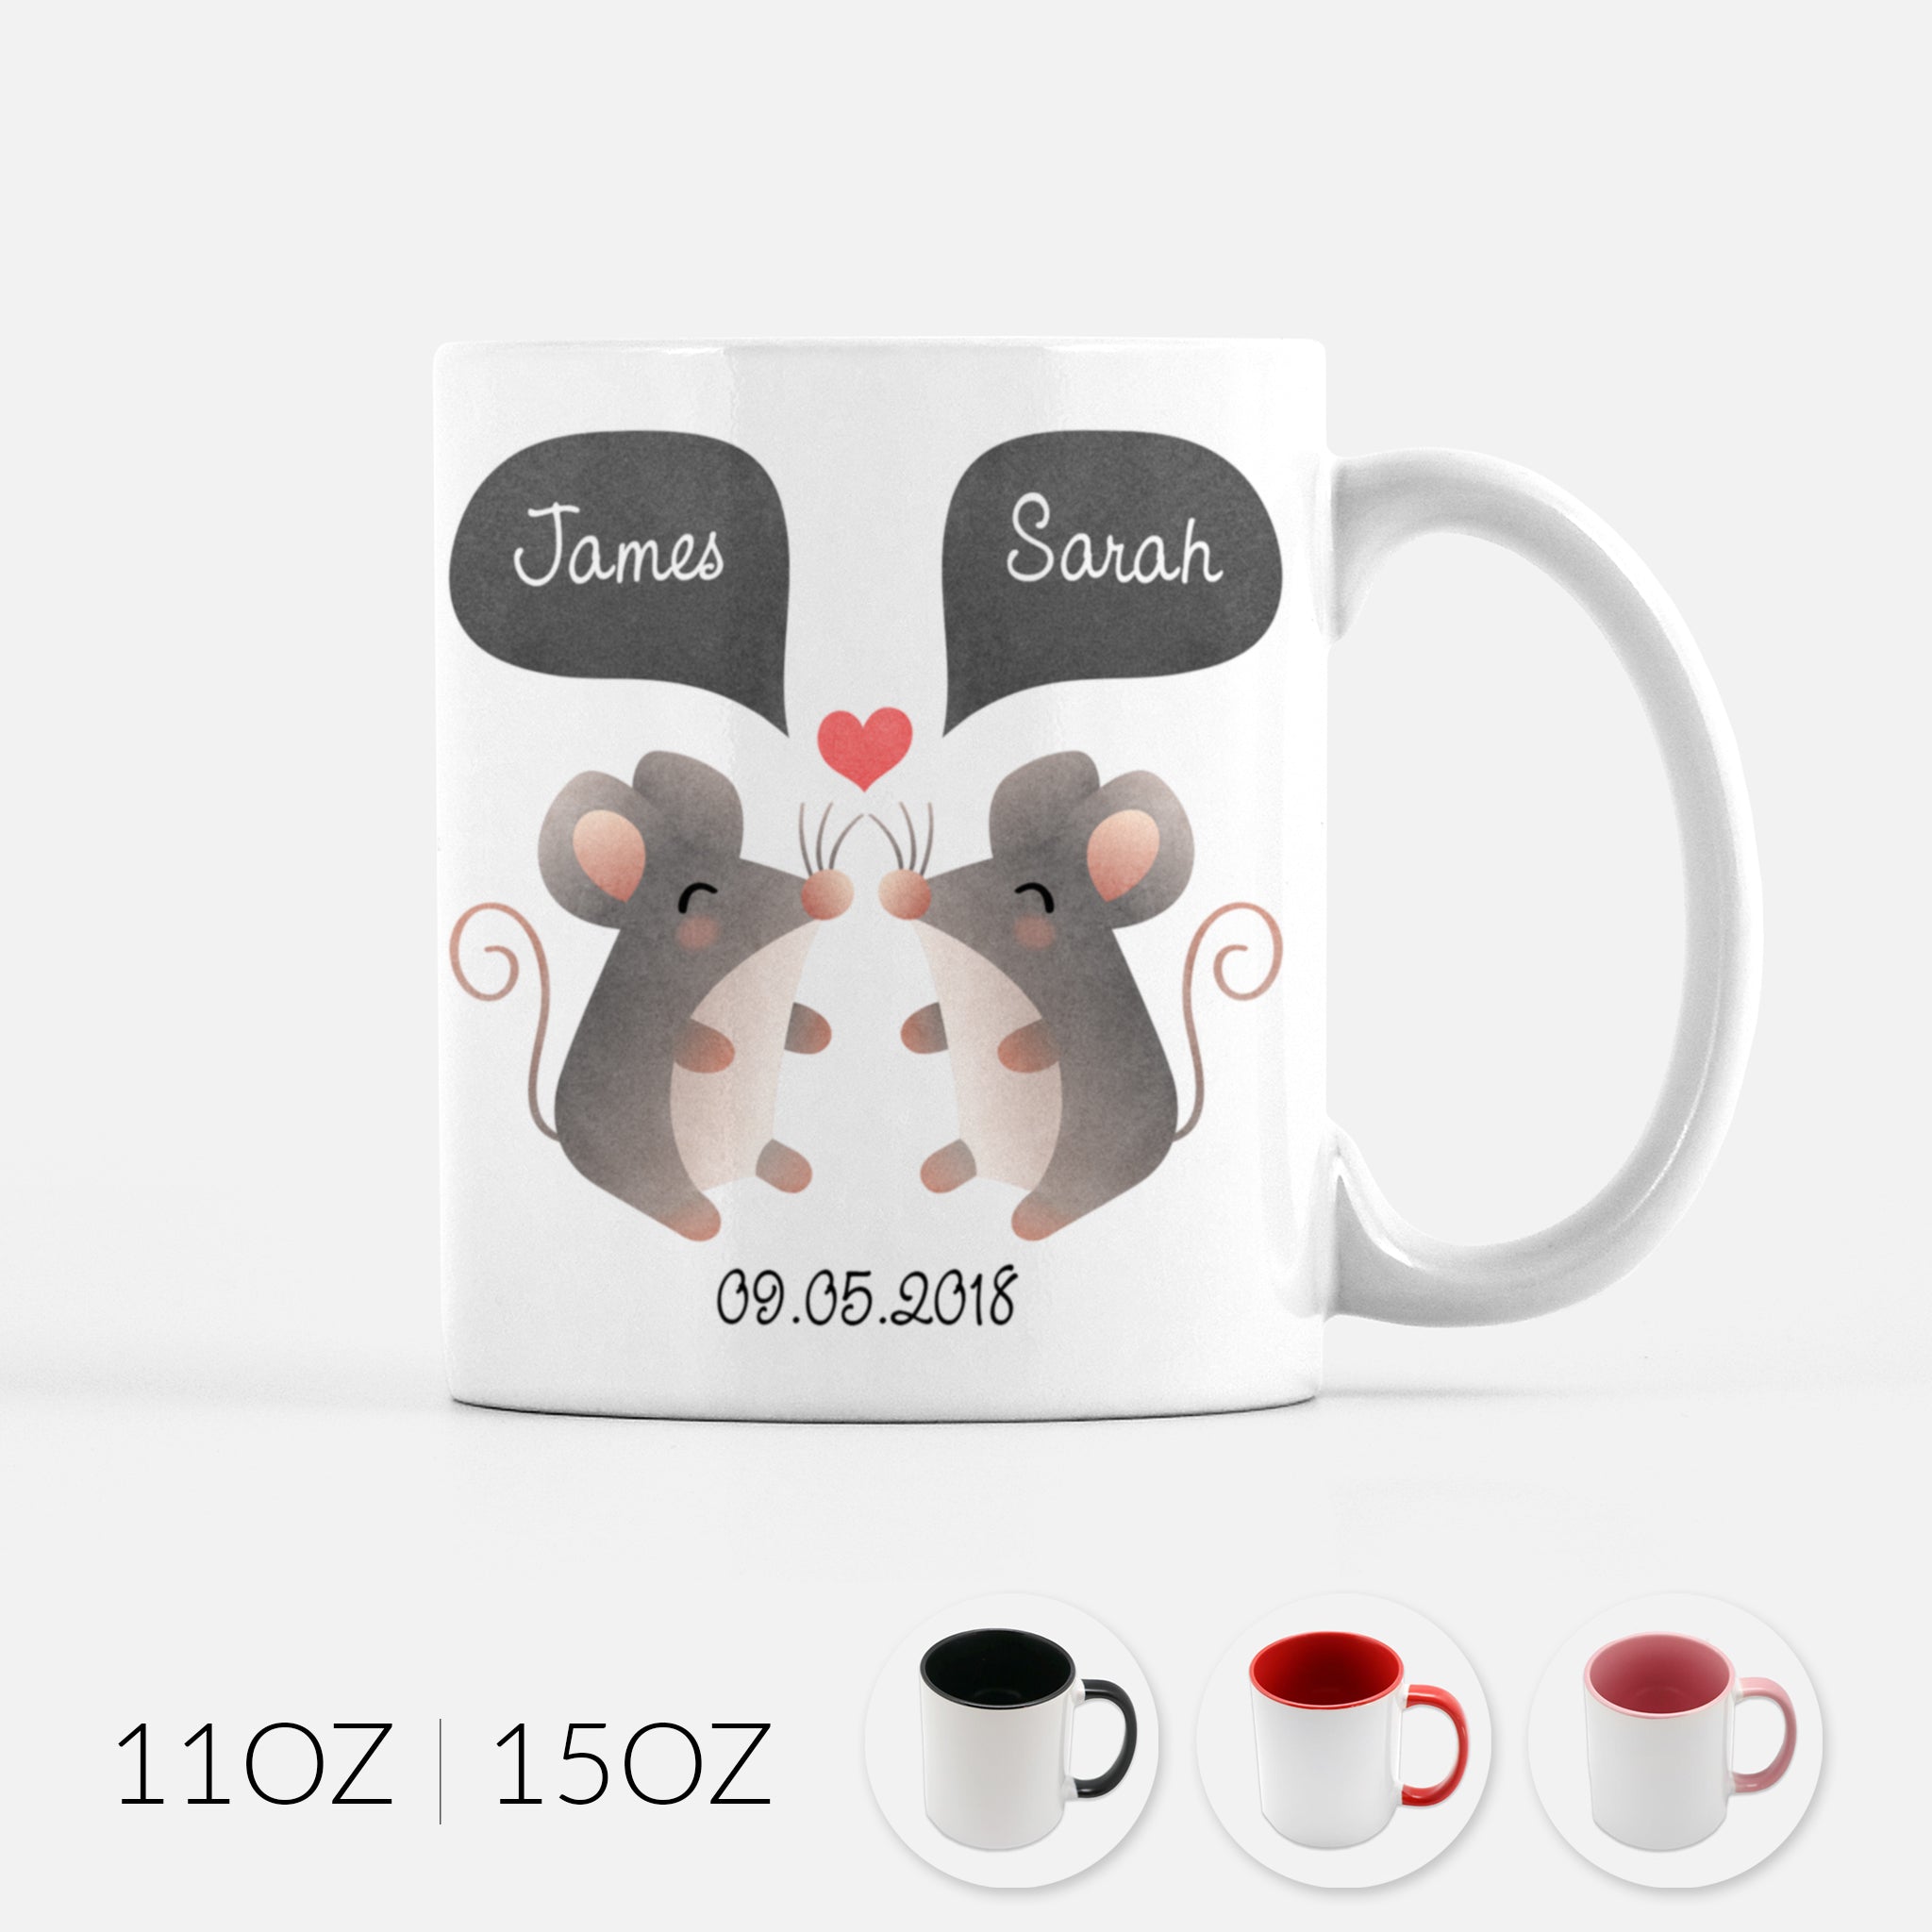 Personalized Mouse Couple Ceramic Coffee Mug for Animal Lover - Cute Unique Valentines Day Christmas Engagement Anniversary Wedding Gift for Her Him Women Men Wife Husband Girlfriend Boyfriend - By Happy Cat Prints